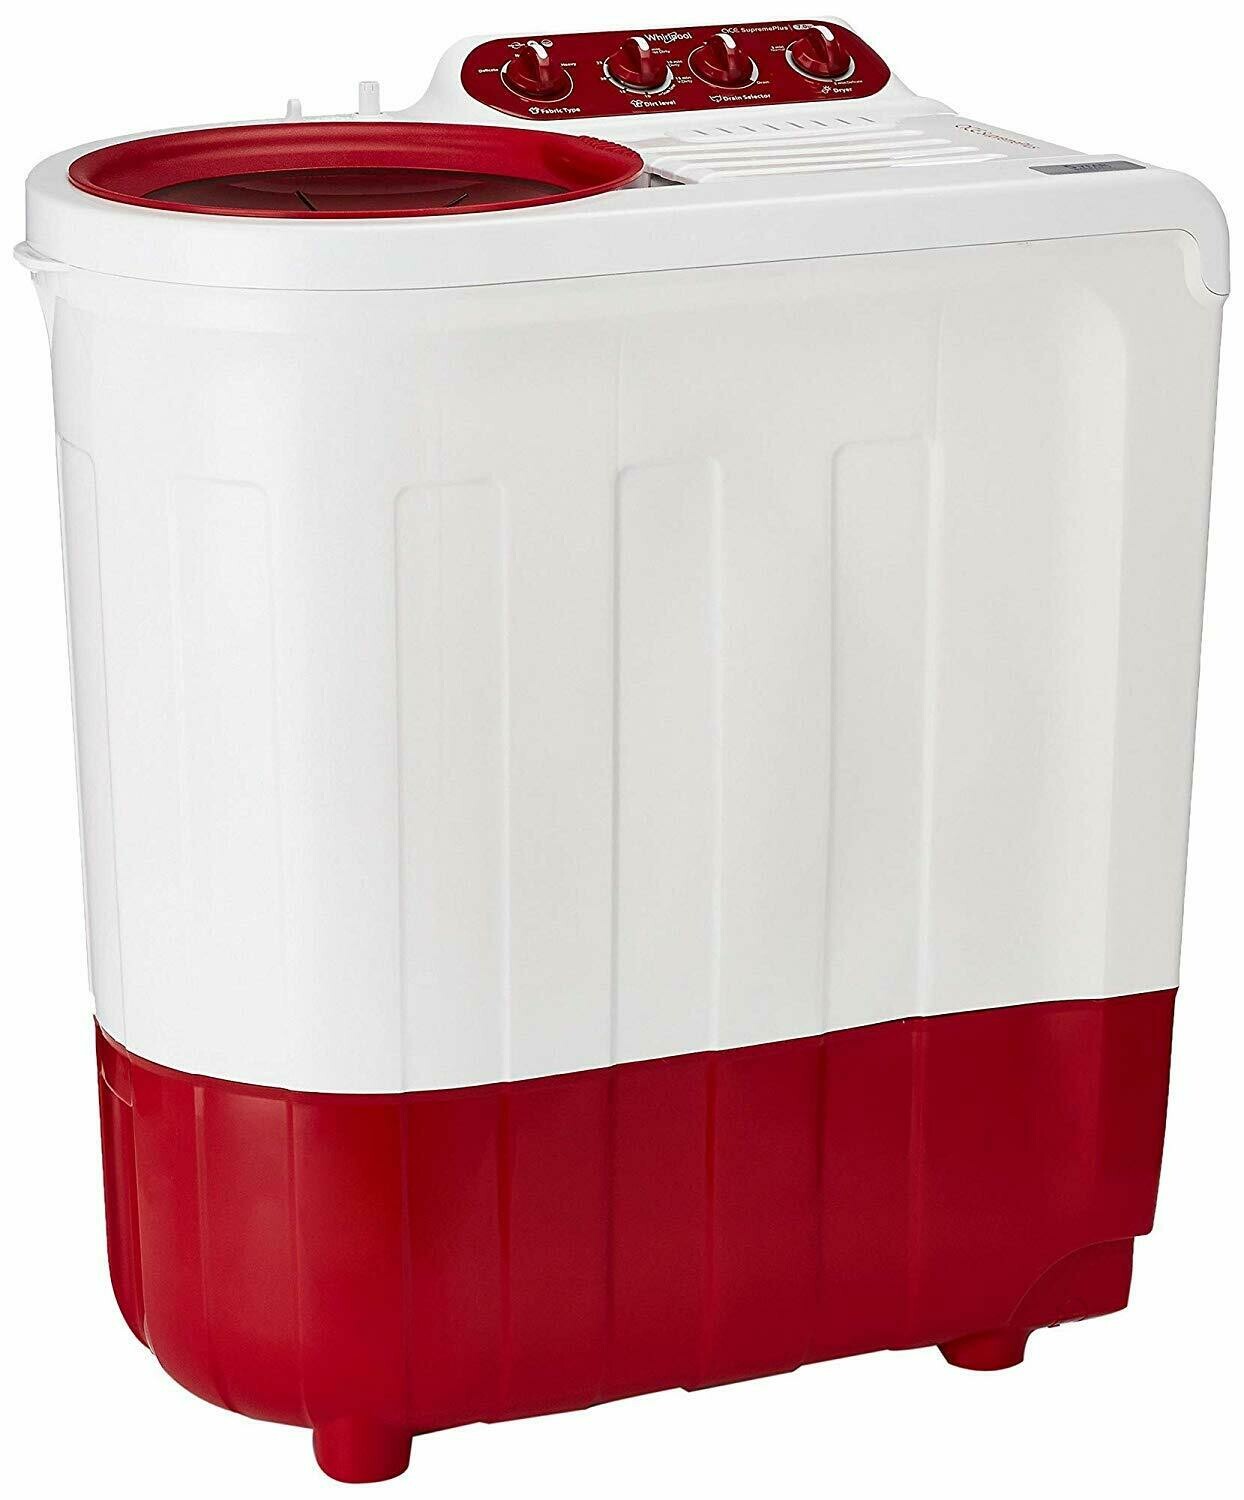 Whirlpool 7.2 Kg Semi-Automatic Top Loading Washing Machine (ACE SUPREME PLUS 7.2, Coral Red, Ace Wash Station)